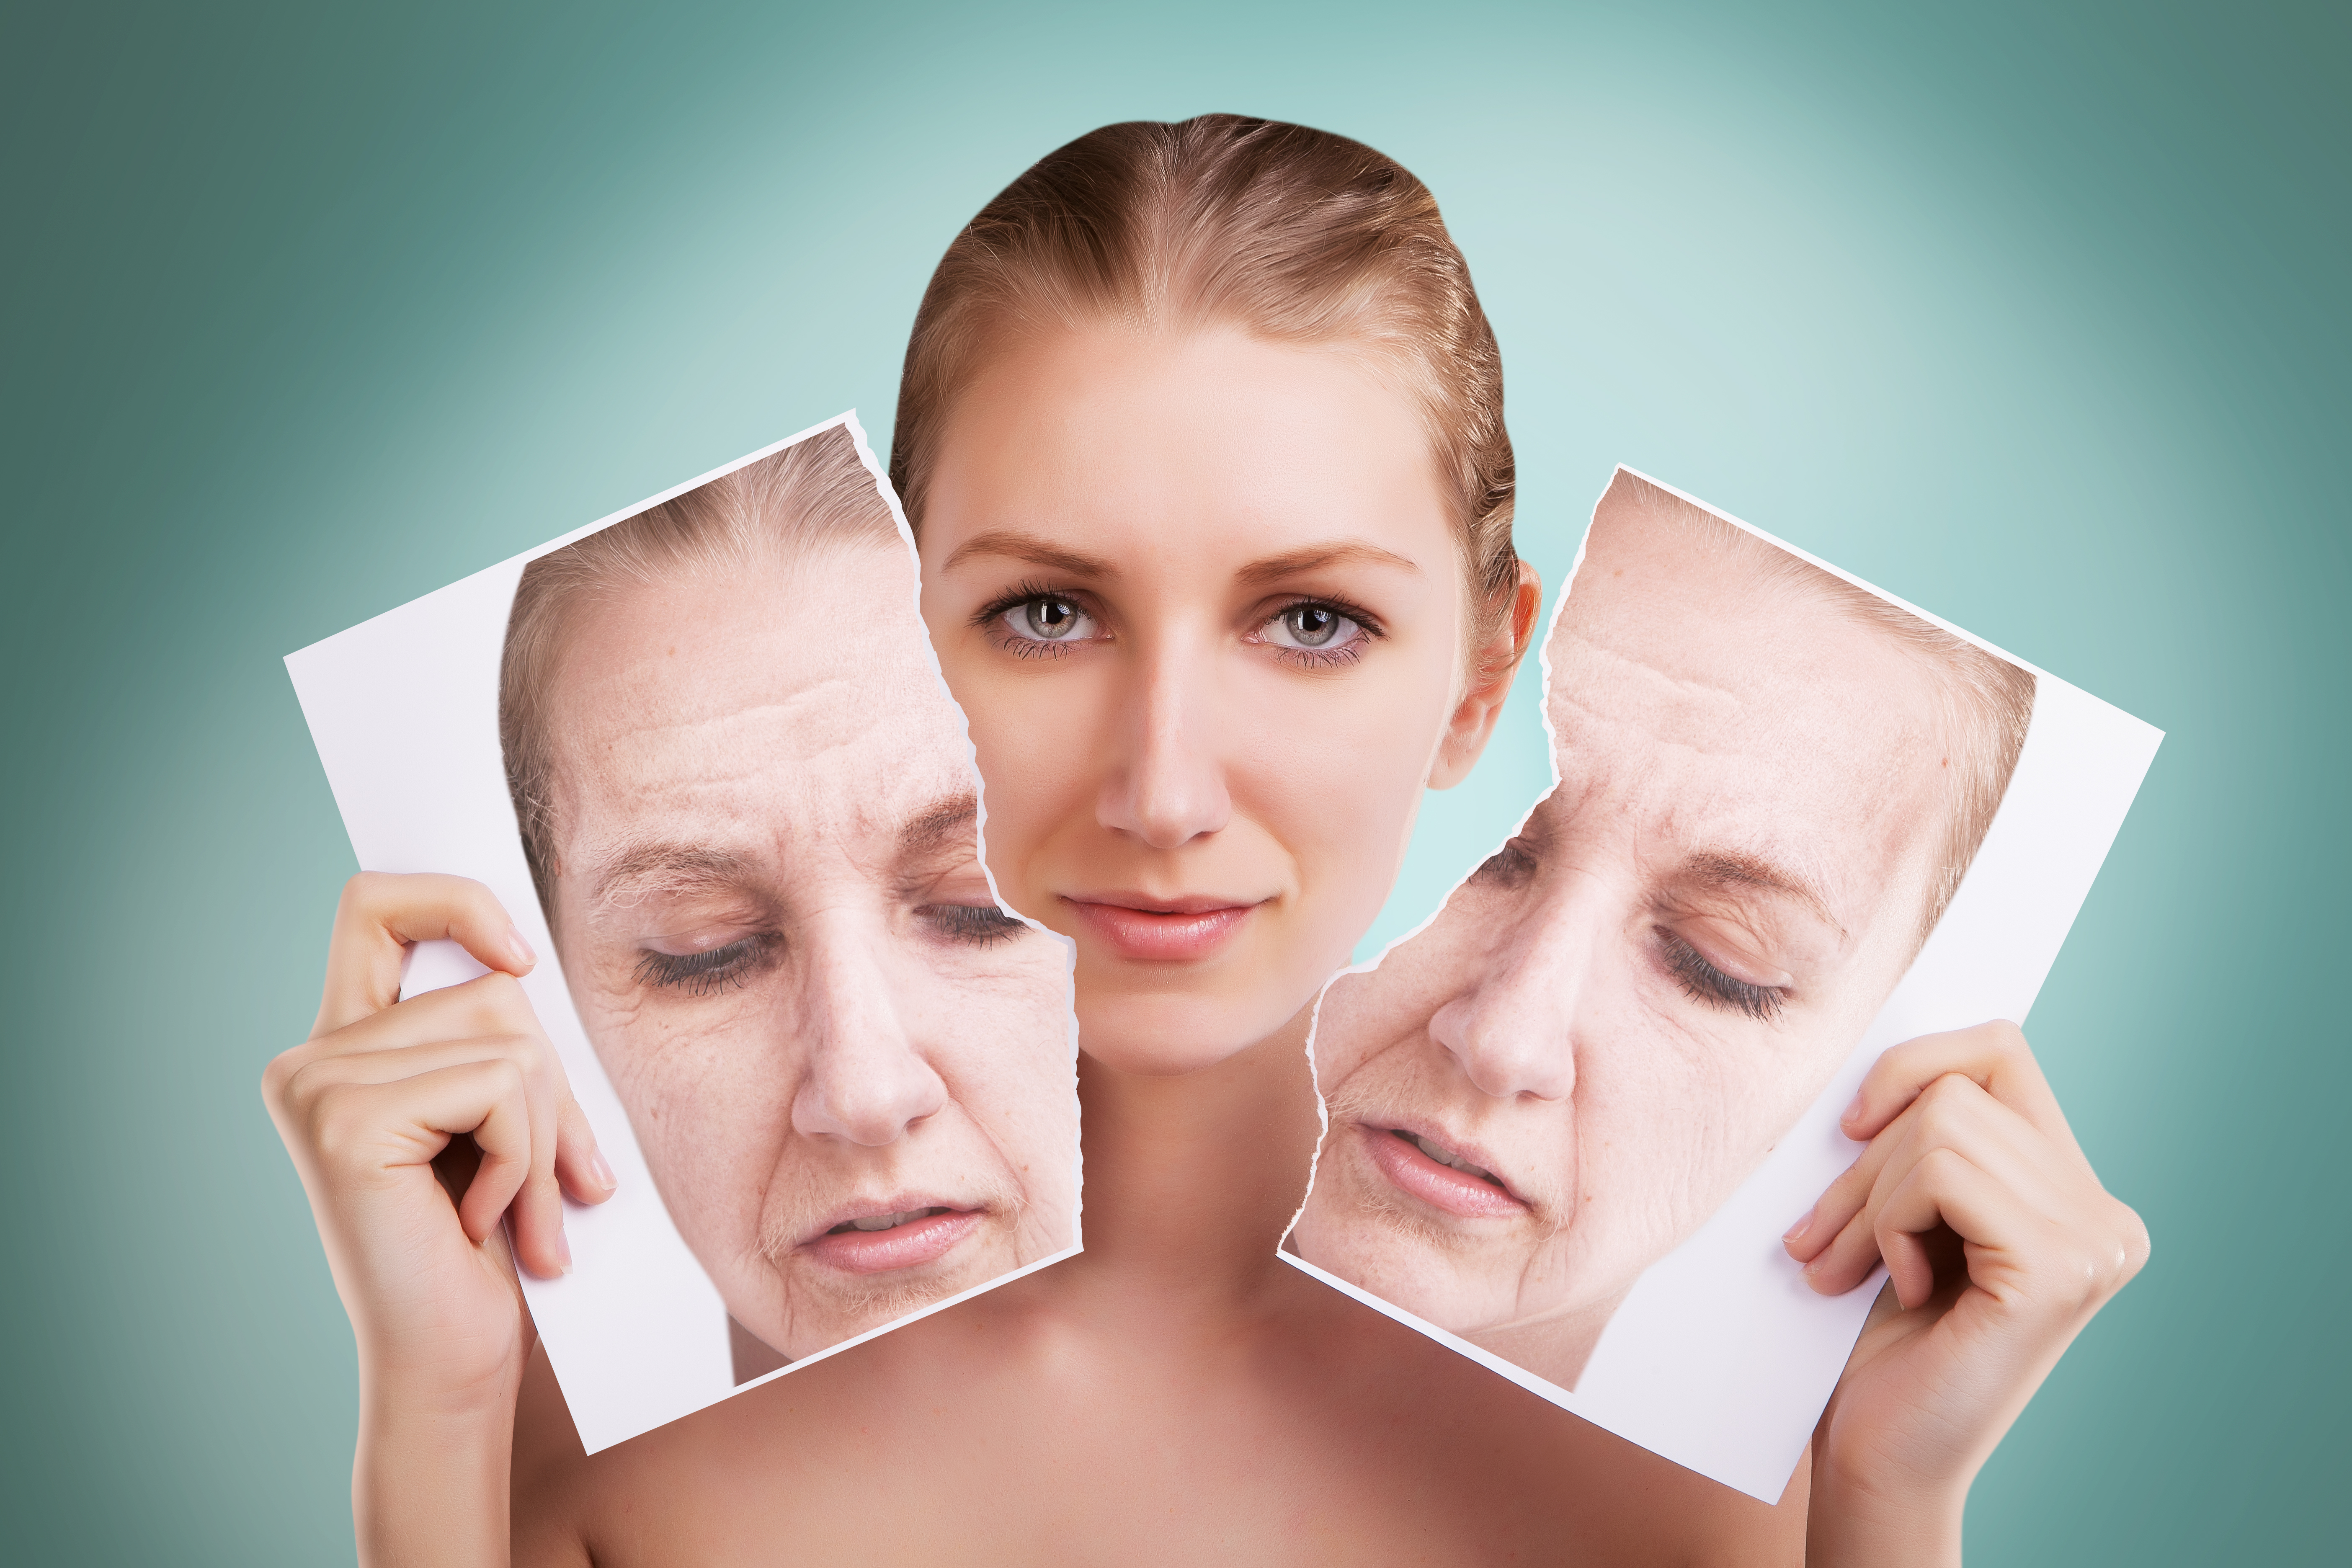 3 Anti-Aging Facial Skin Care Treatments for Younger Looking Skin